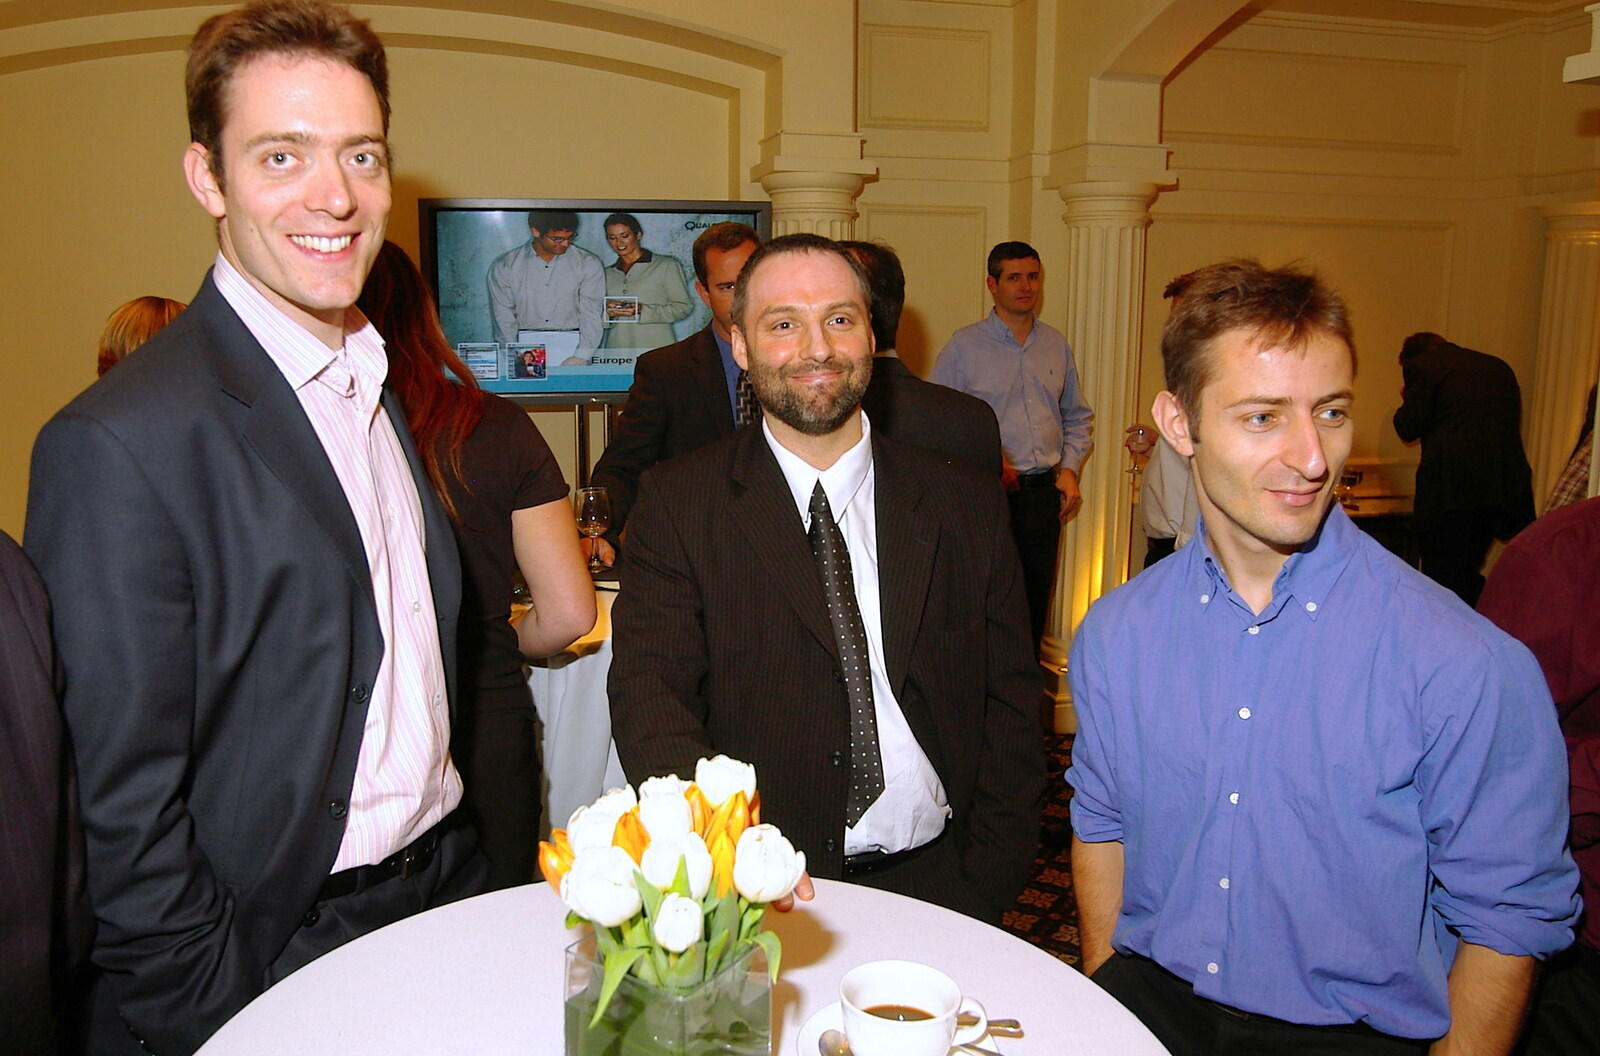 Stef, Craig and Ben from Qualcomm Europe All-Hands at the Berkeley Hotel, London - 9th November 2005